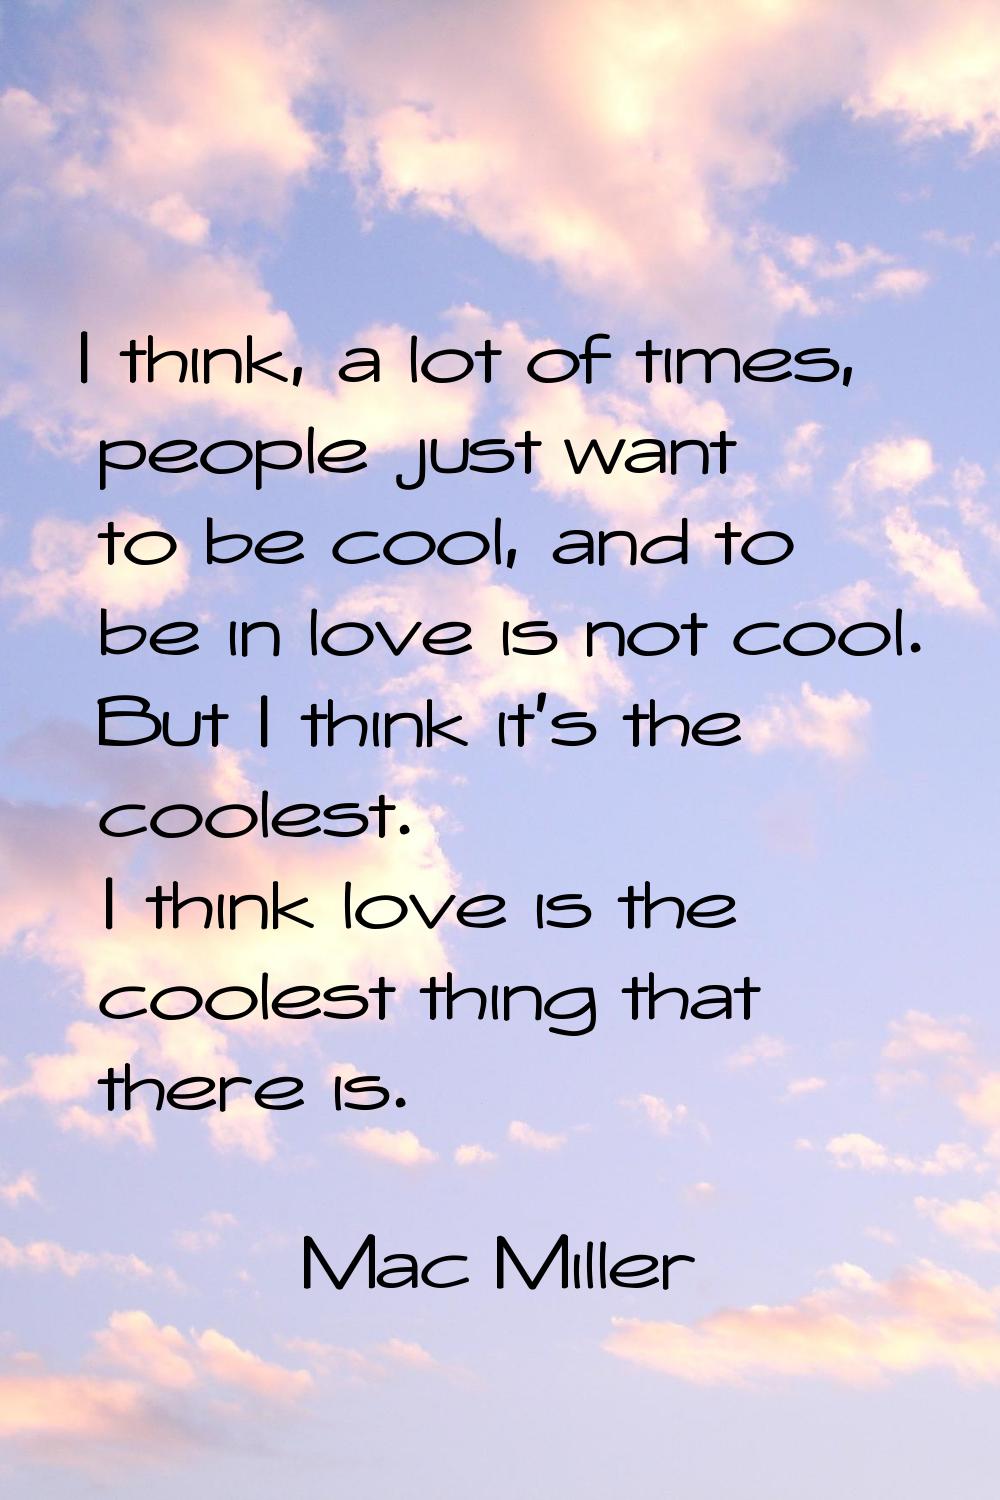 I think, a lot of times, people just want to be cool, and to be in love is not cool. But I think it